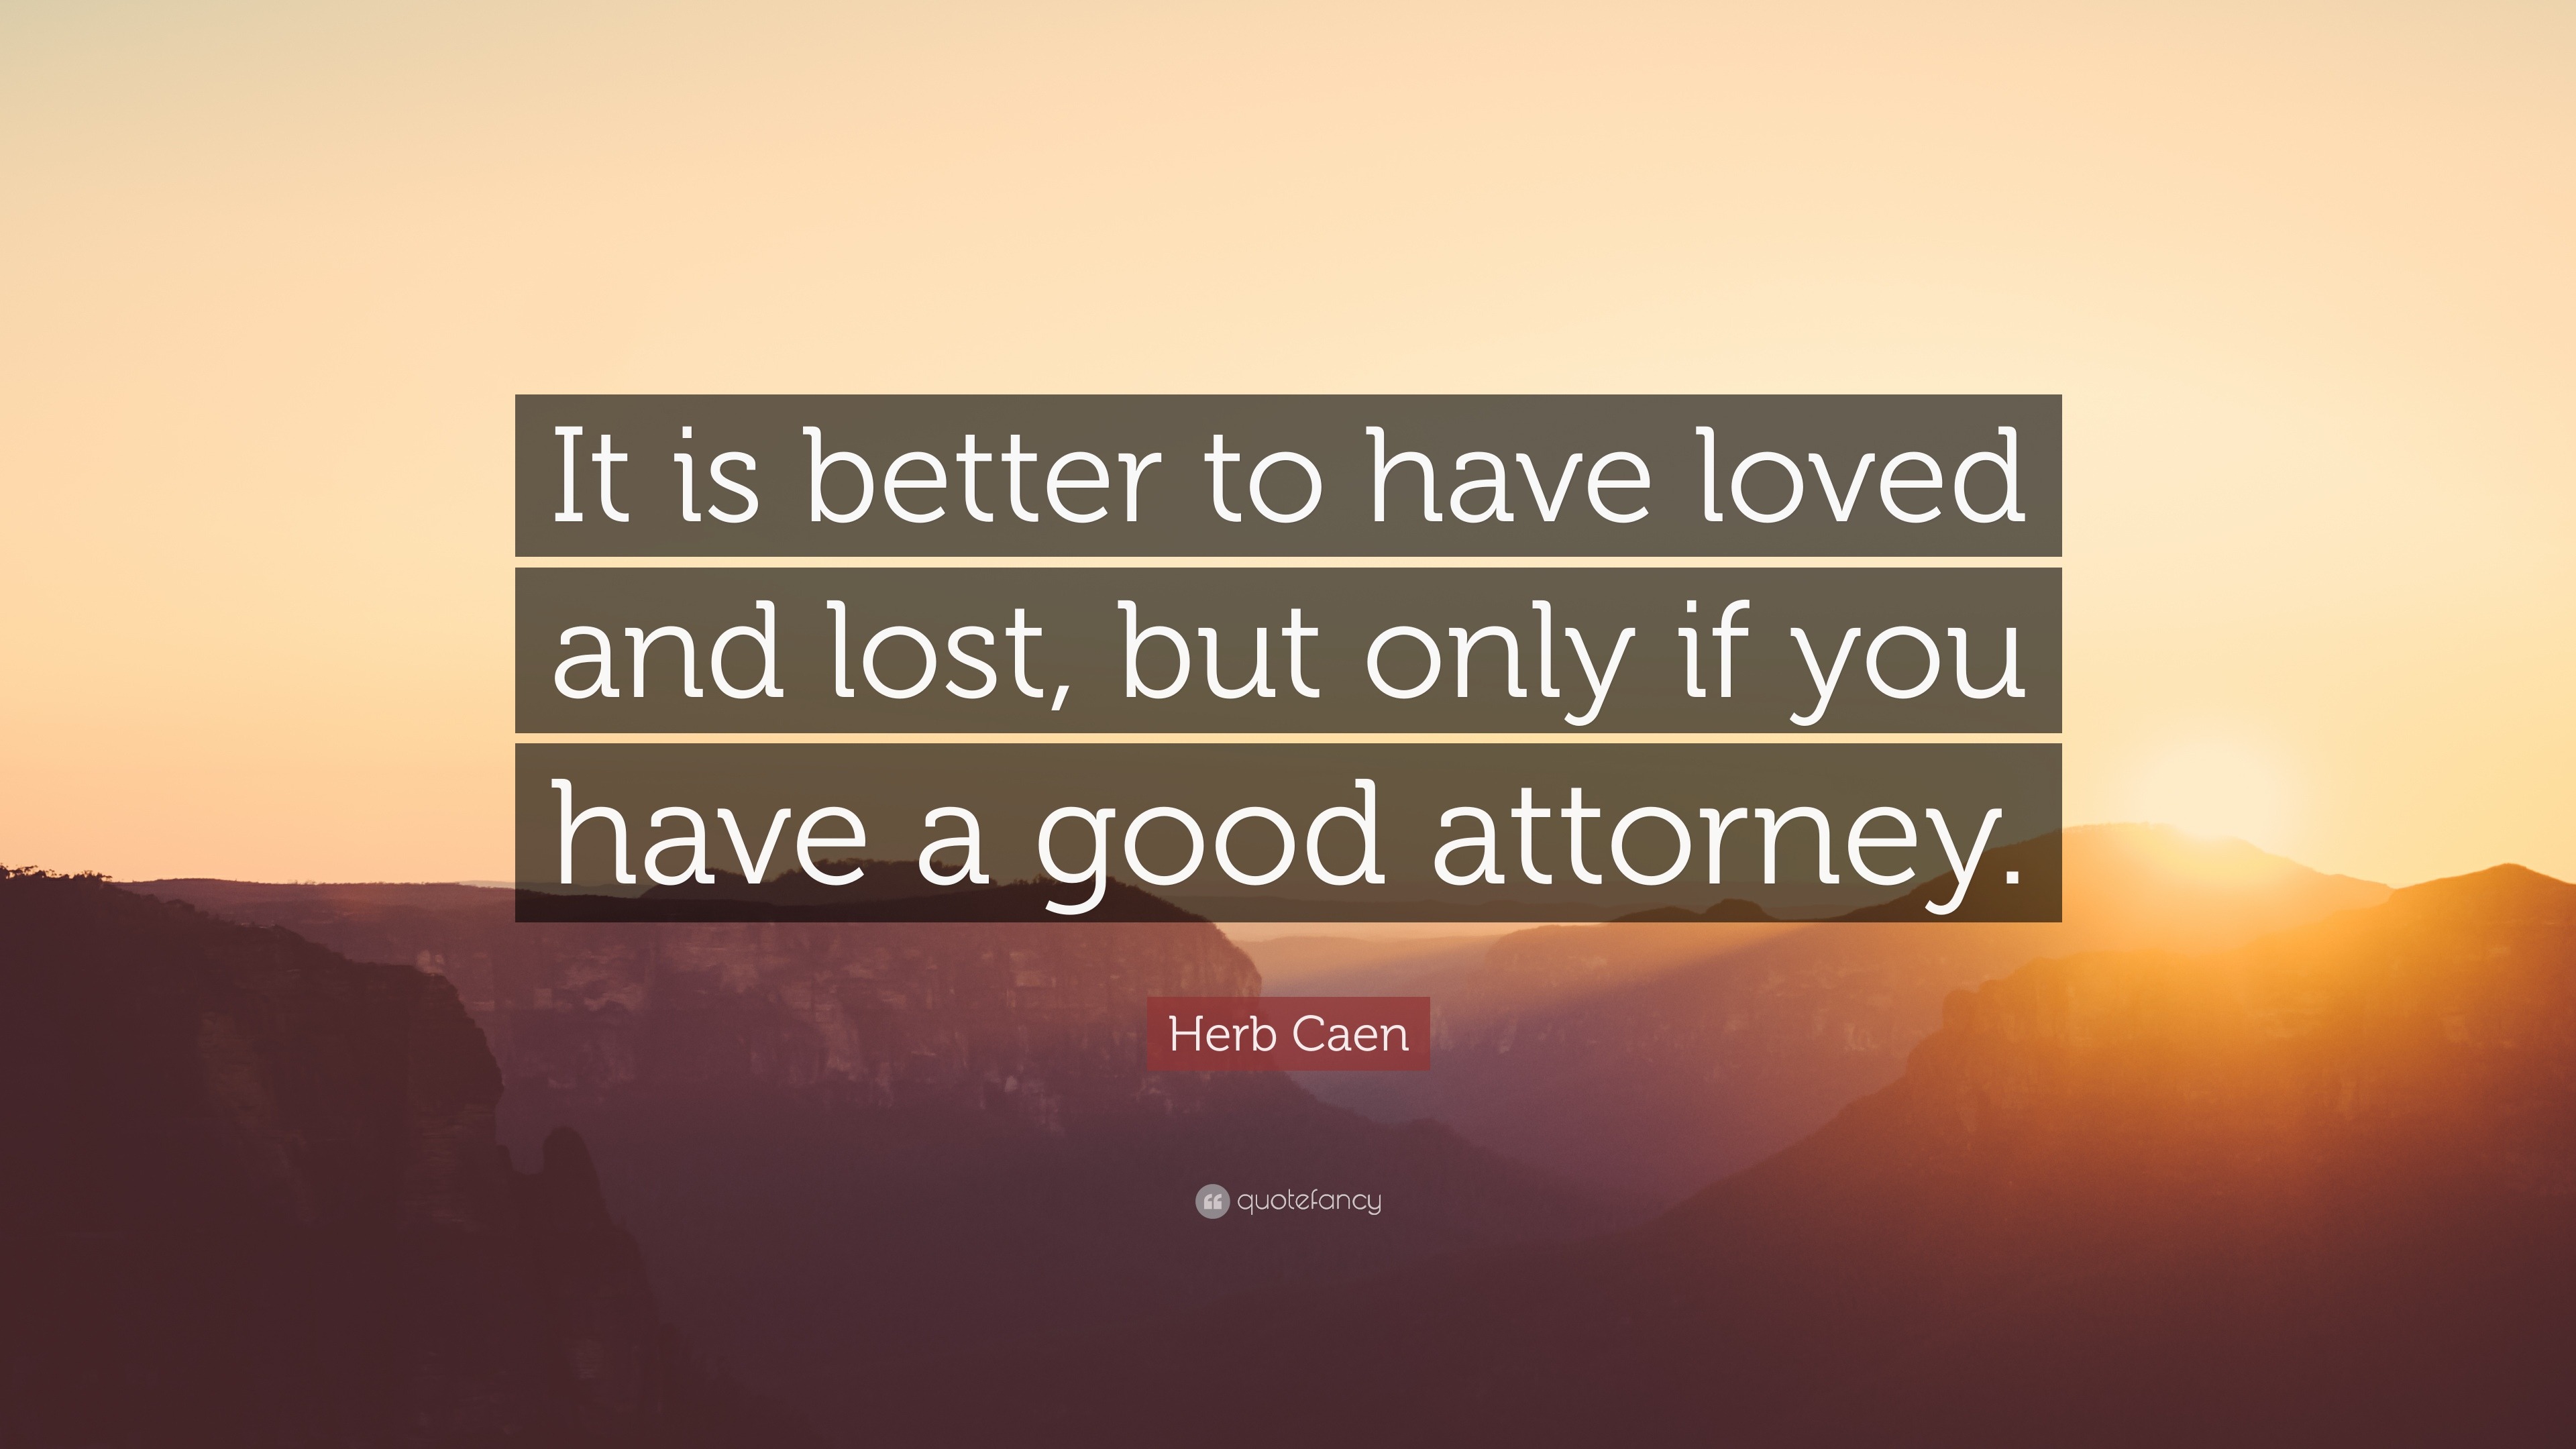 Herb Caen Quote “It is better to have loved and lost but only